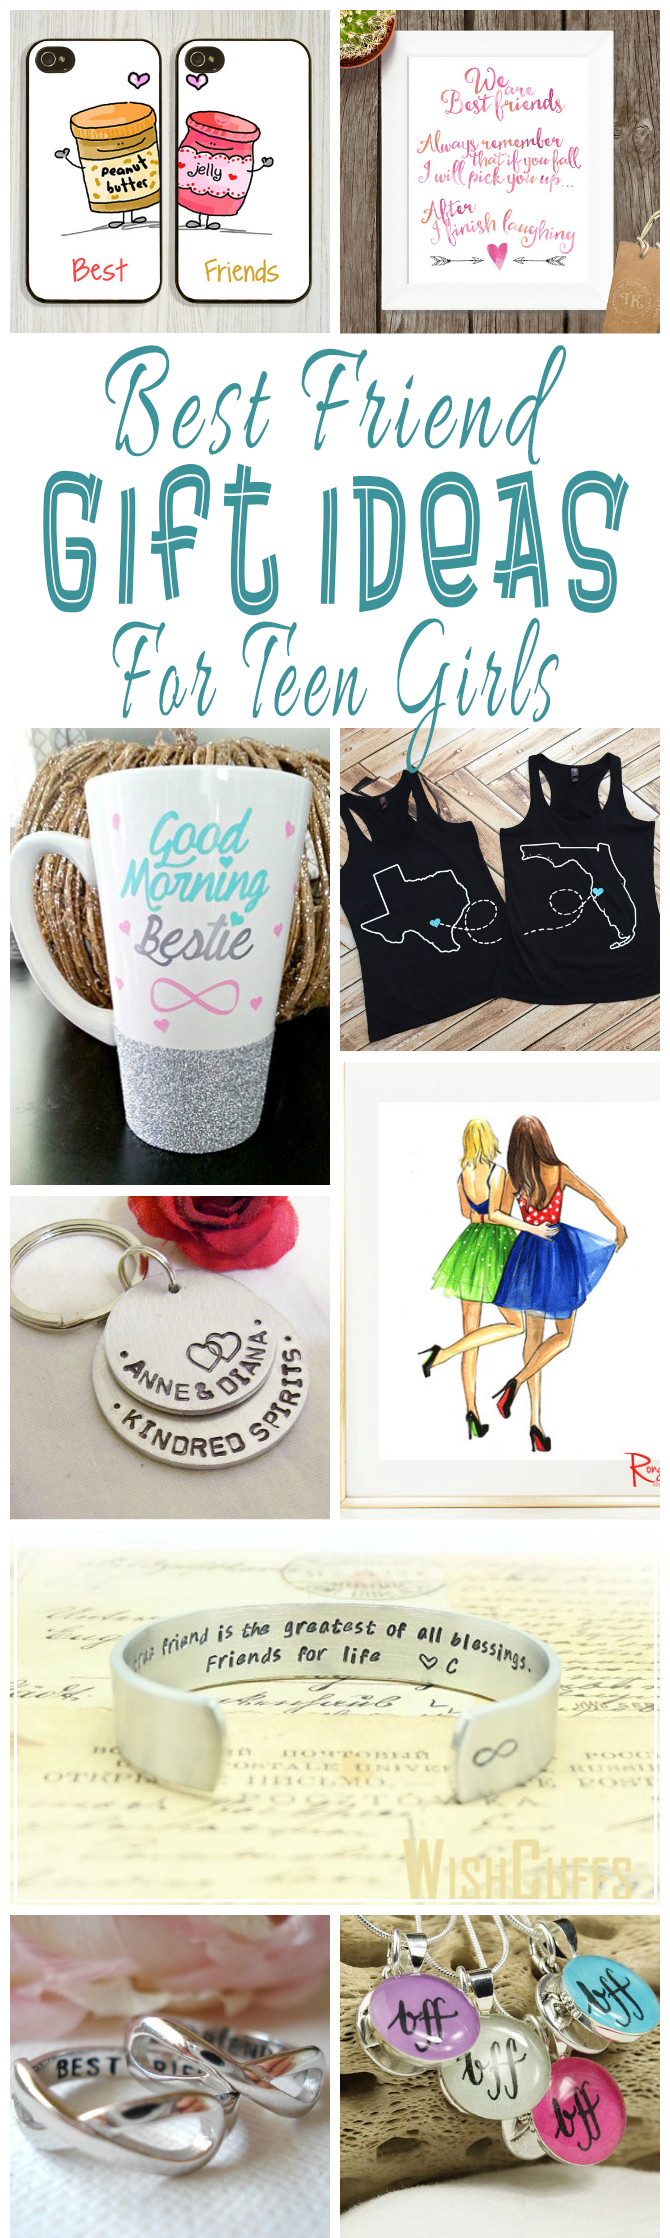 Cute Gift Ideas For Your Best Friend
 Best Friend Gift Ideas For Teens